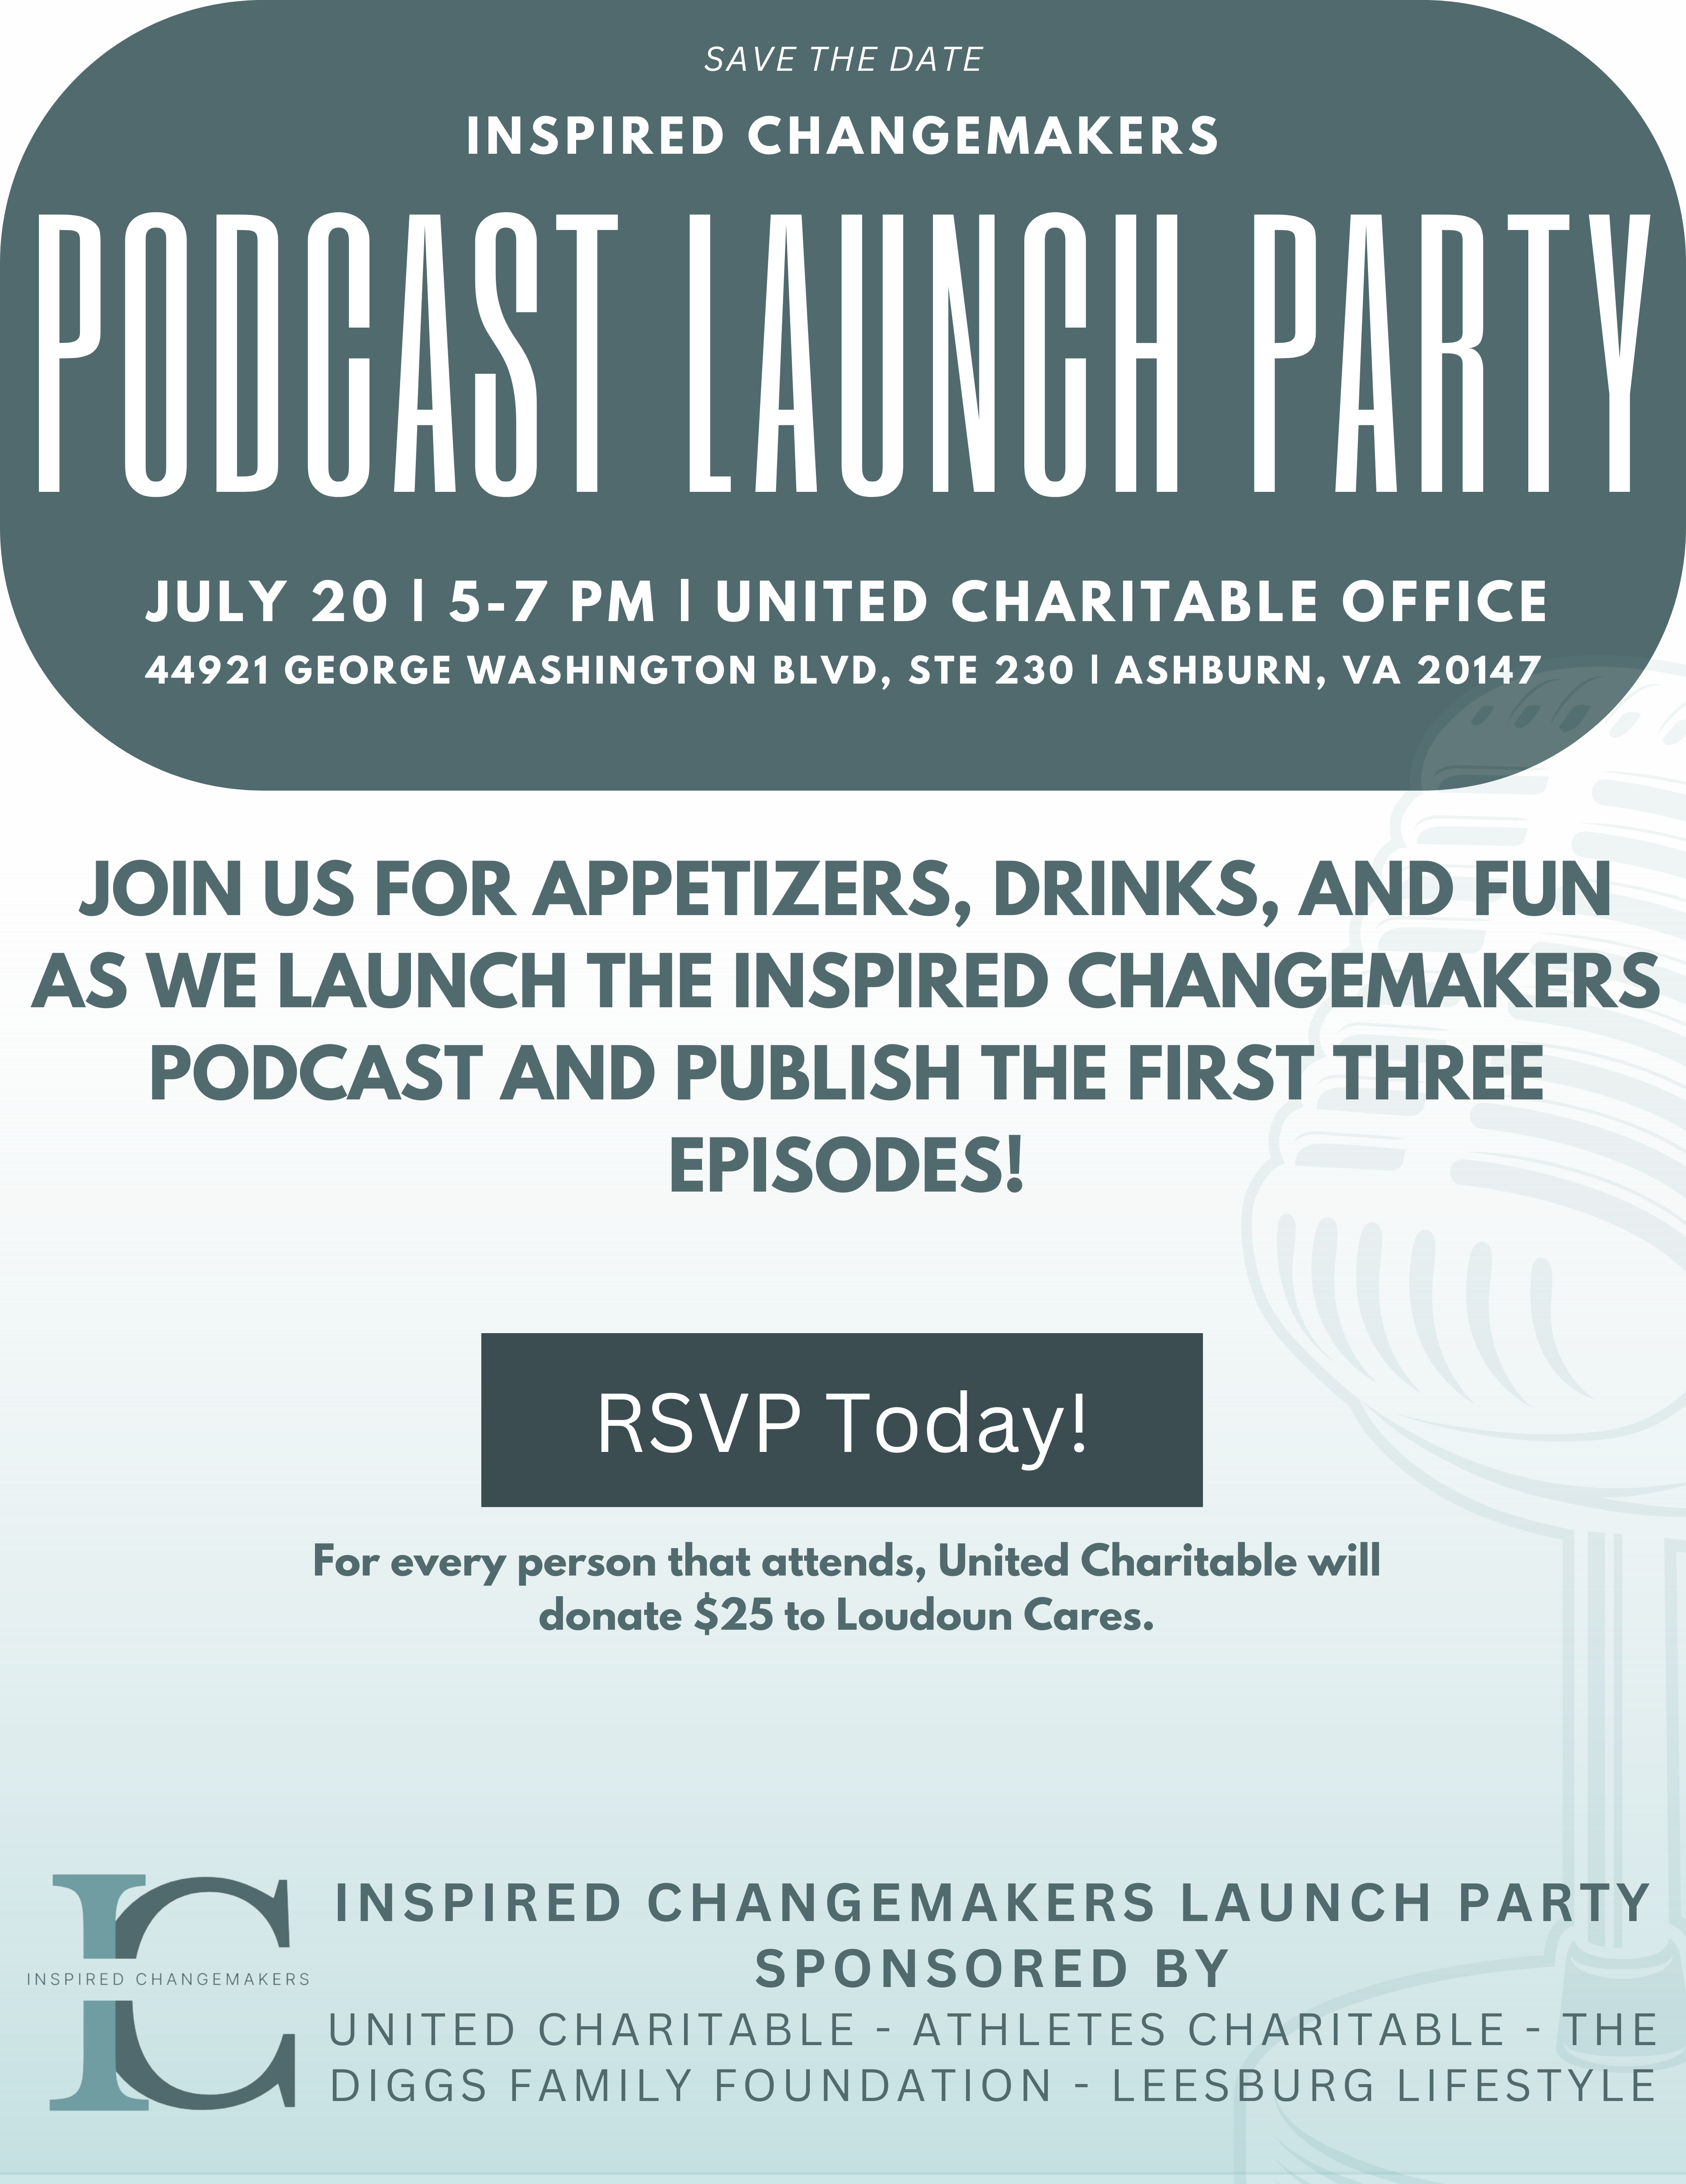 Join United Charitable at their Inspired Changmakers Podcast Launch Party